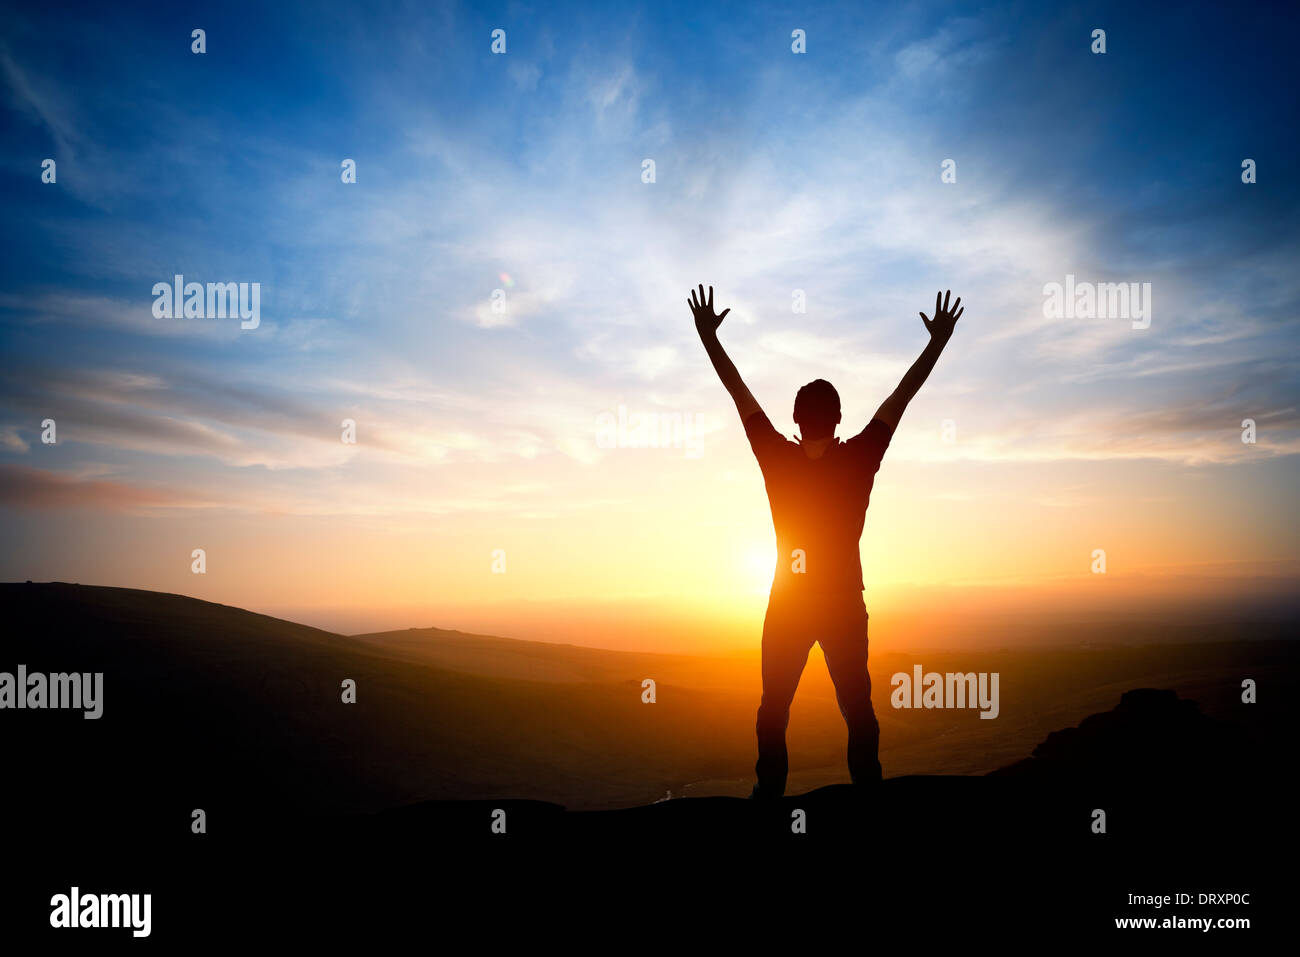 Fresh New Morning - A person reaching up on a bright morning sunrise. Stock Photo